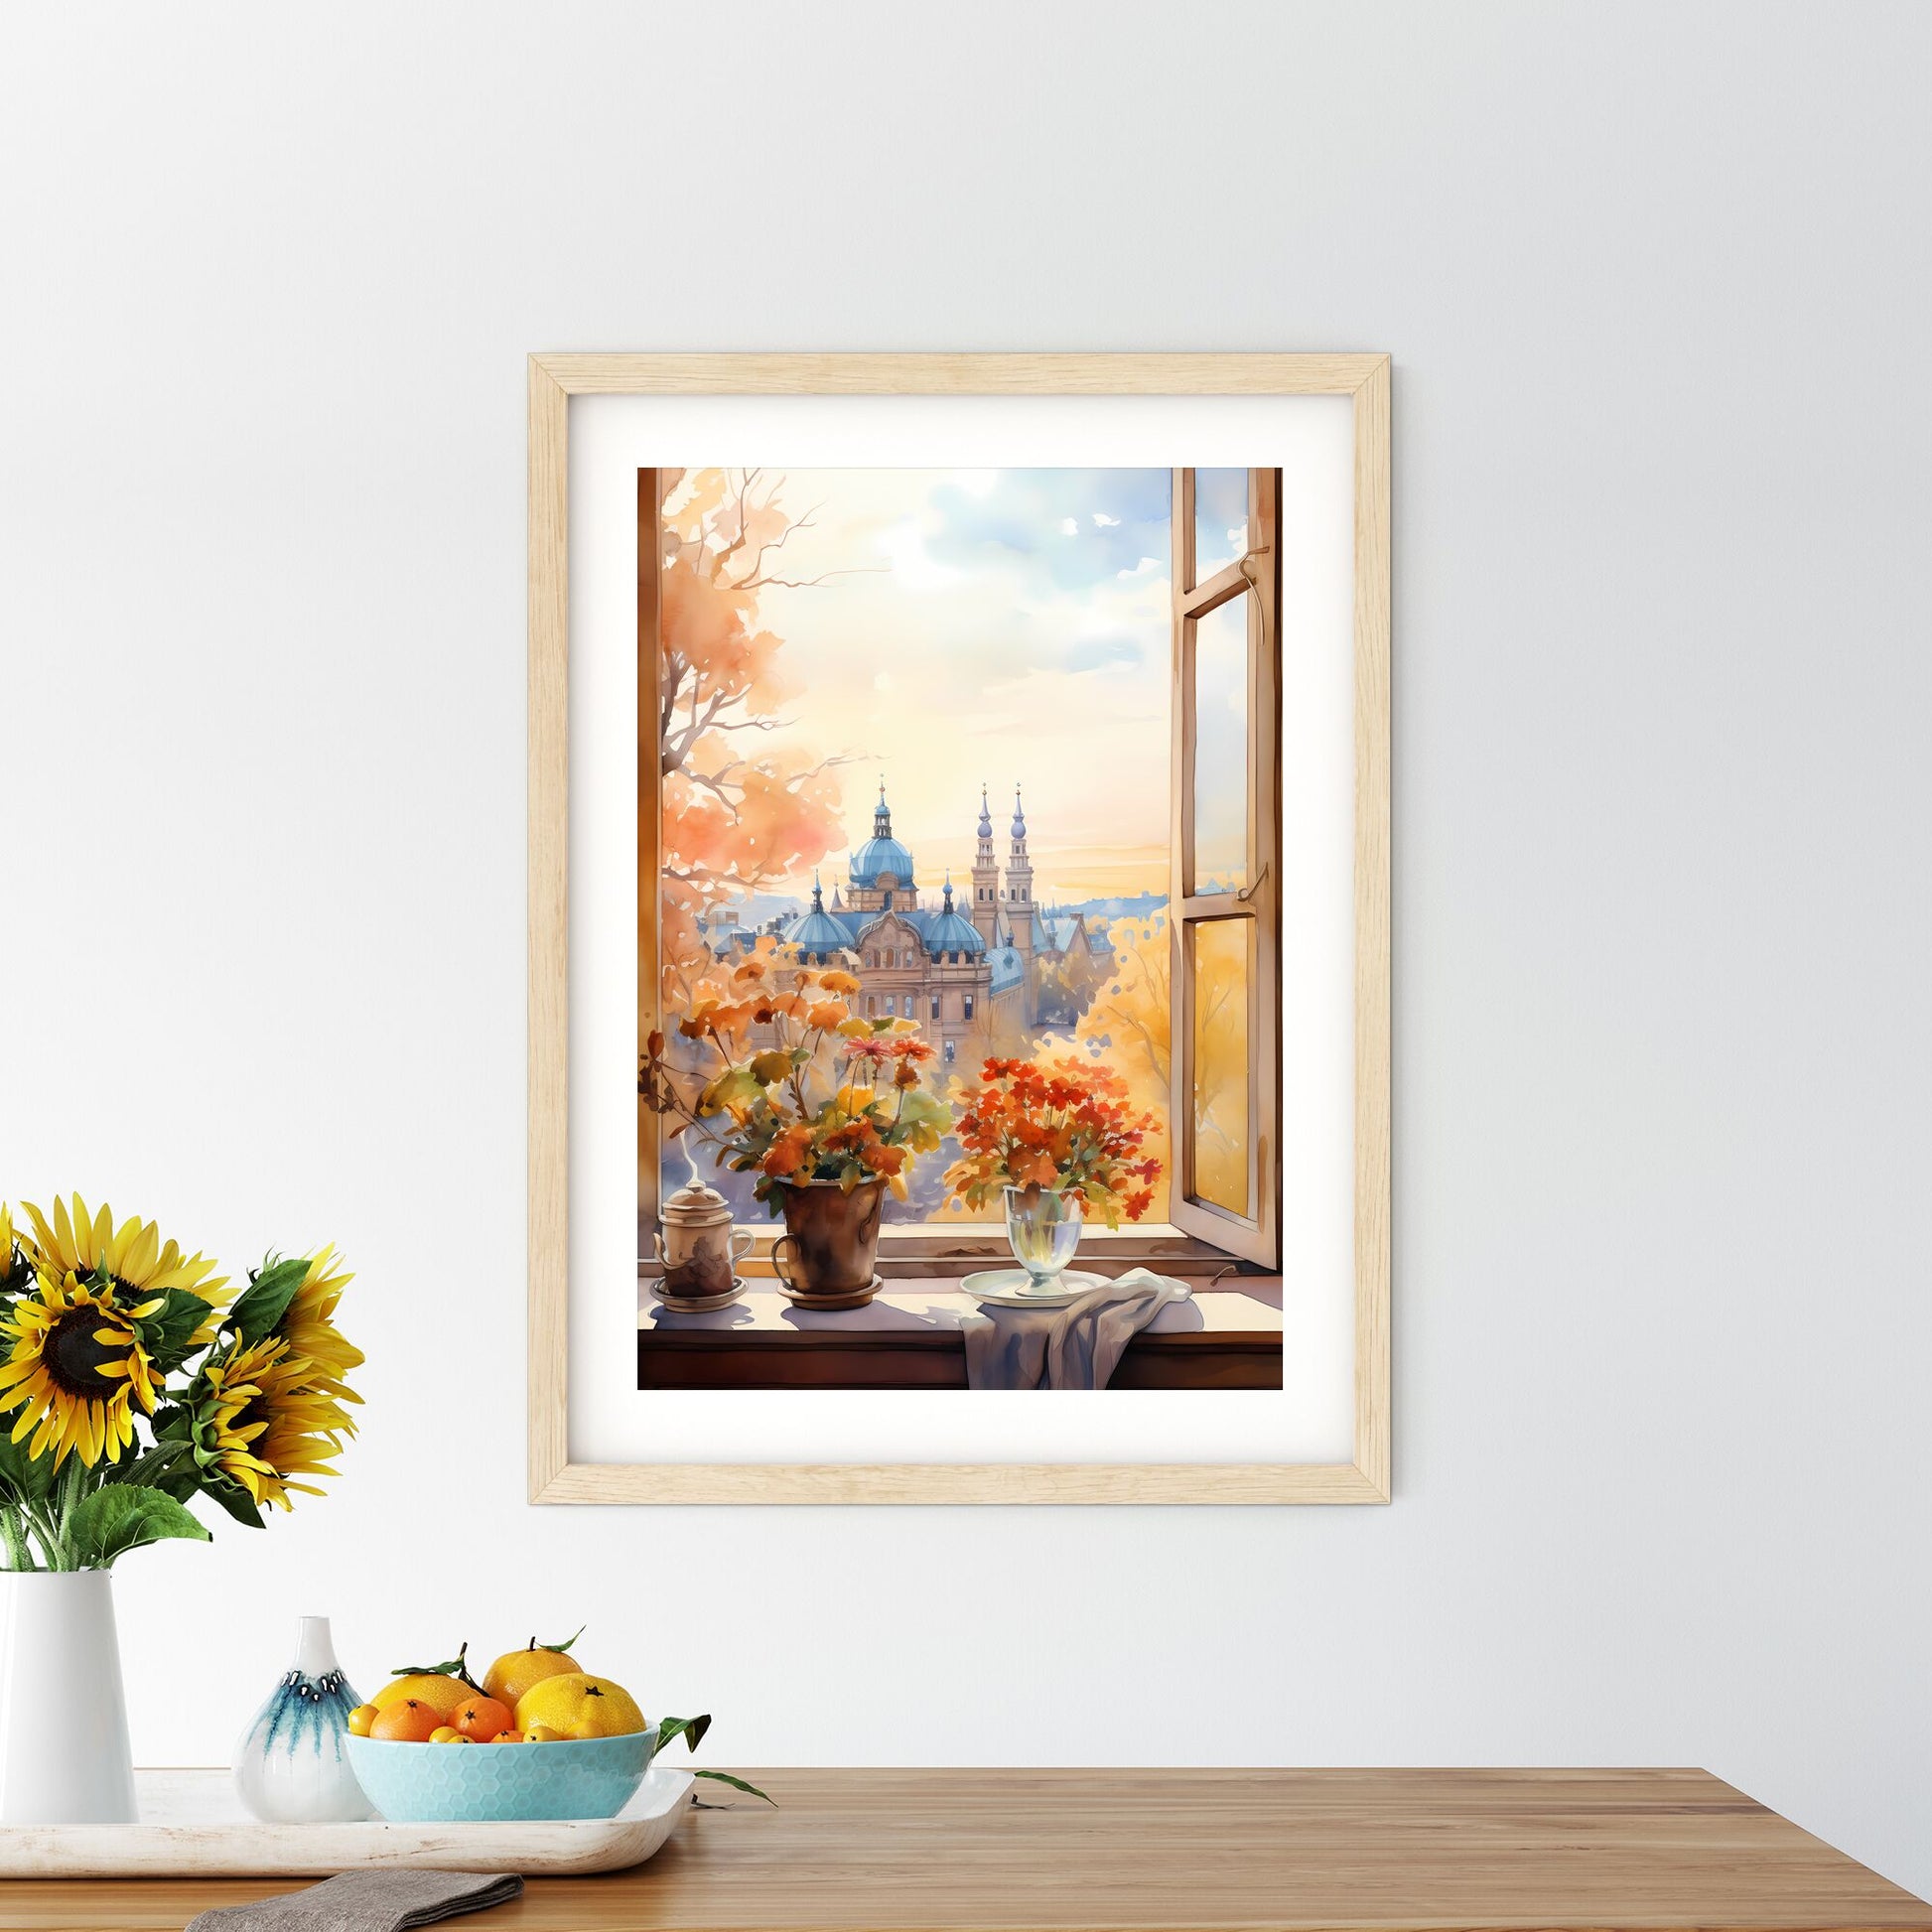 Window With A View Of A Castle And Flowers Art Print Default Title